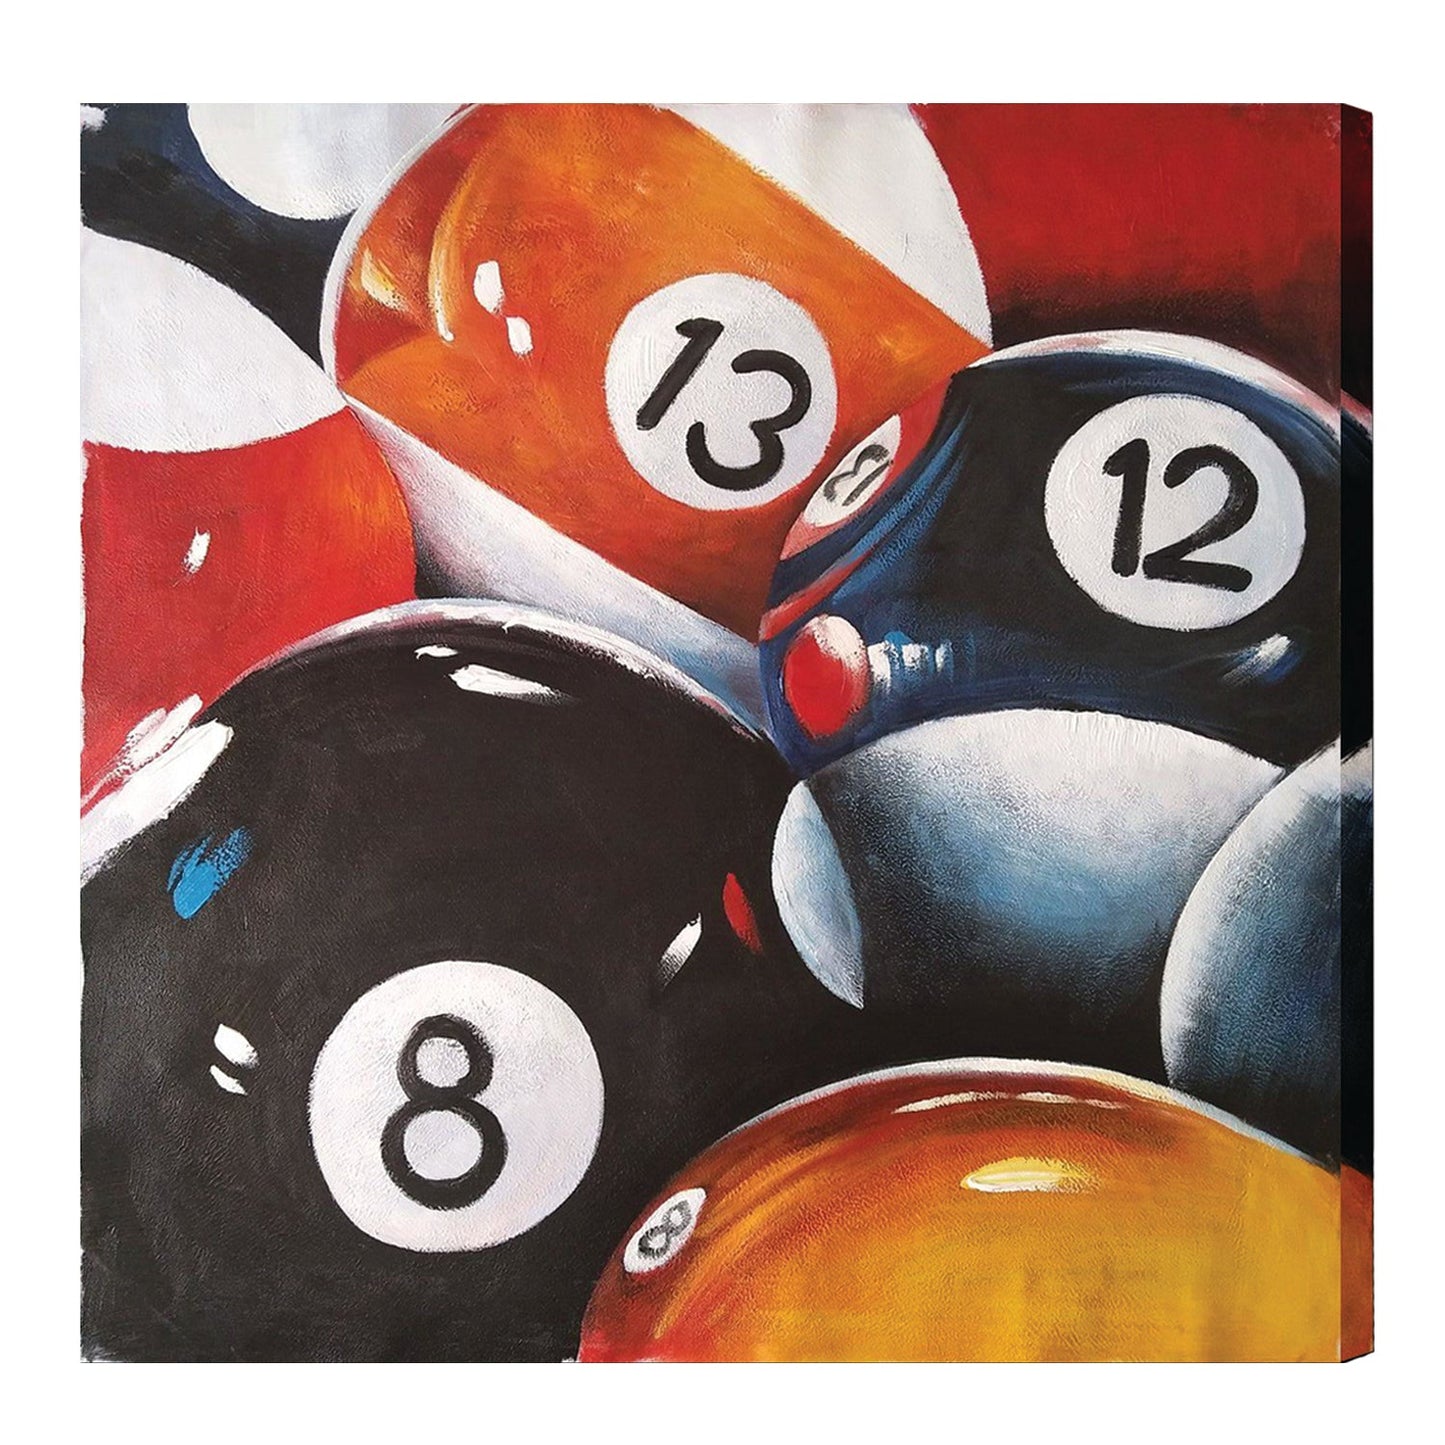 OIL PAINTING ON CANVAS - 8, 12, & 13 BALLS-Game Table Genie